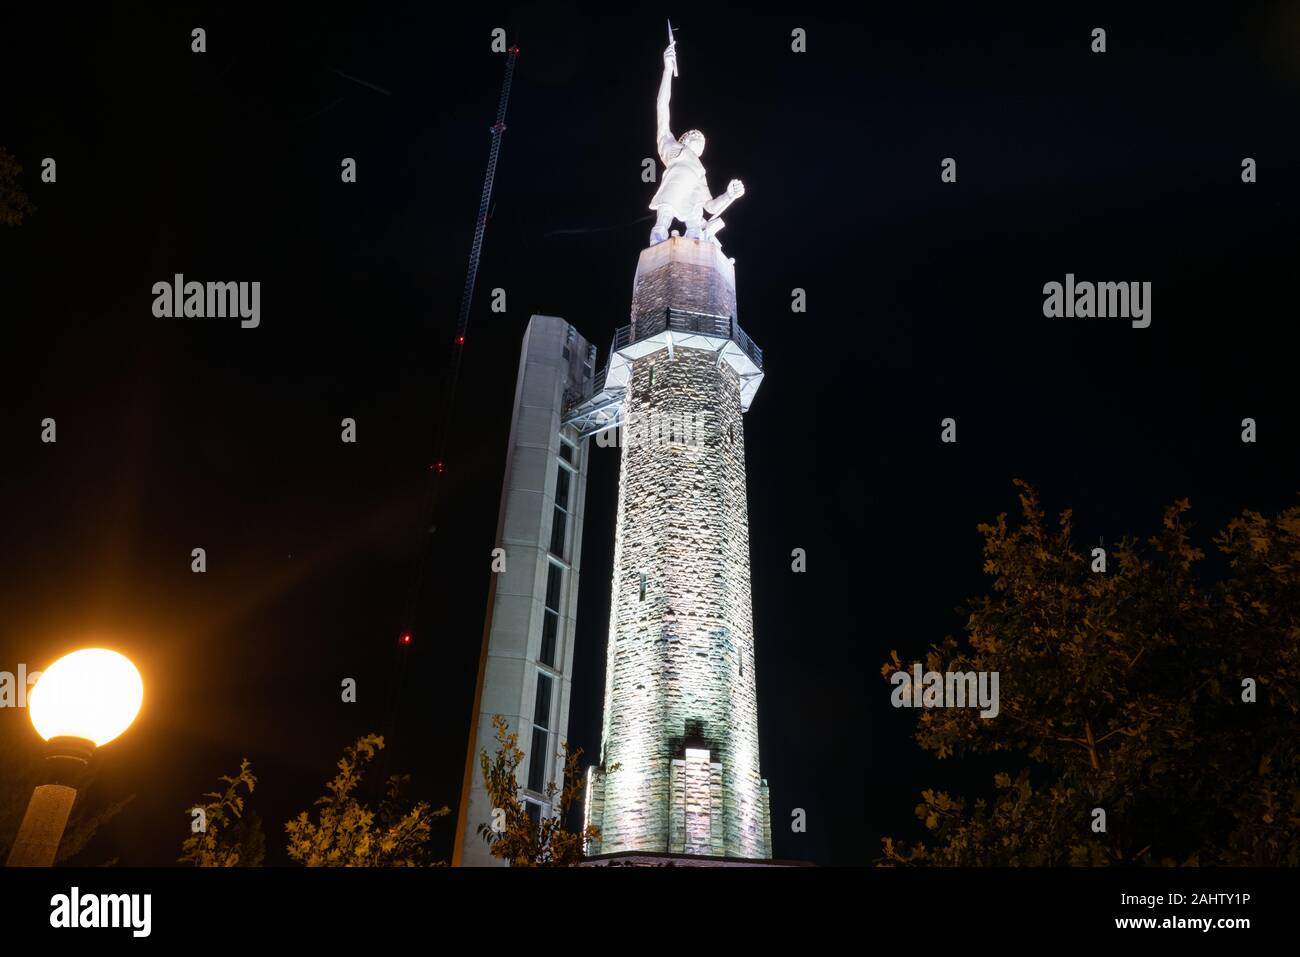 Birmingham, AL - October 7, 2019: Historic 56 Foot Tall Vulcan Statue and observation tower at Night Stock Photo